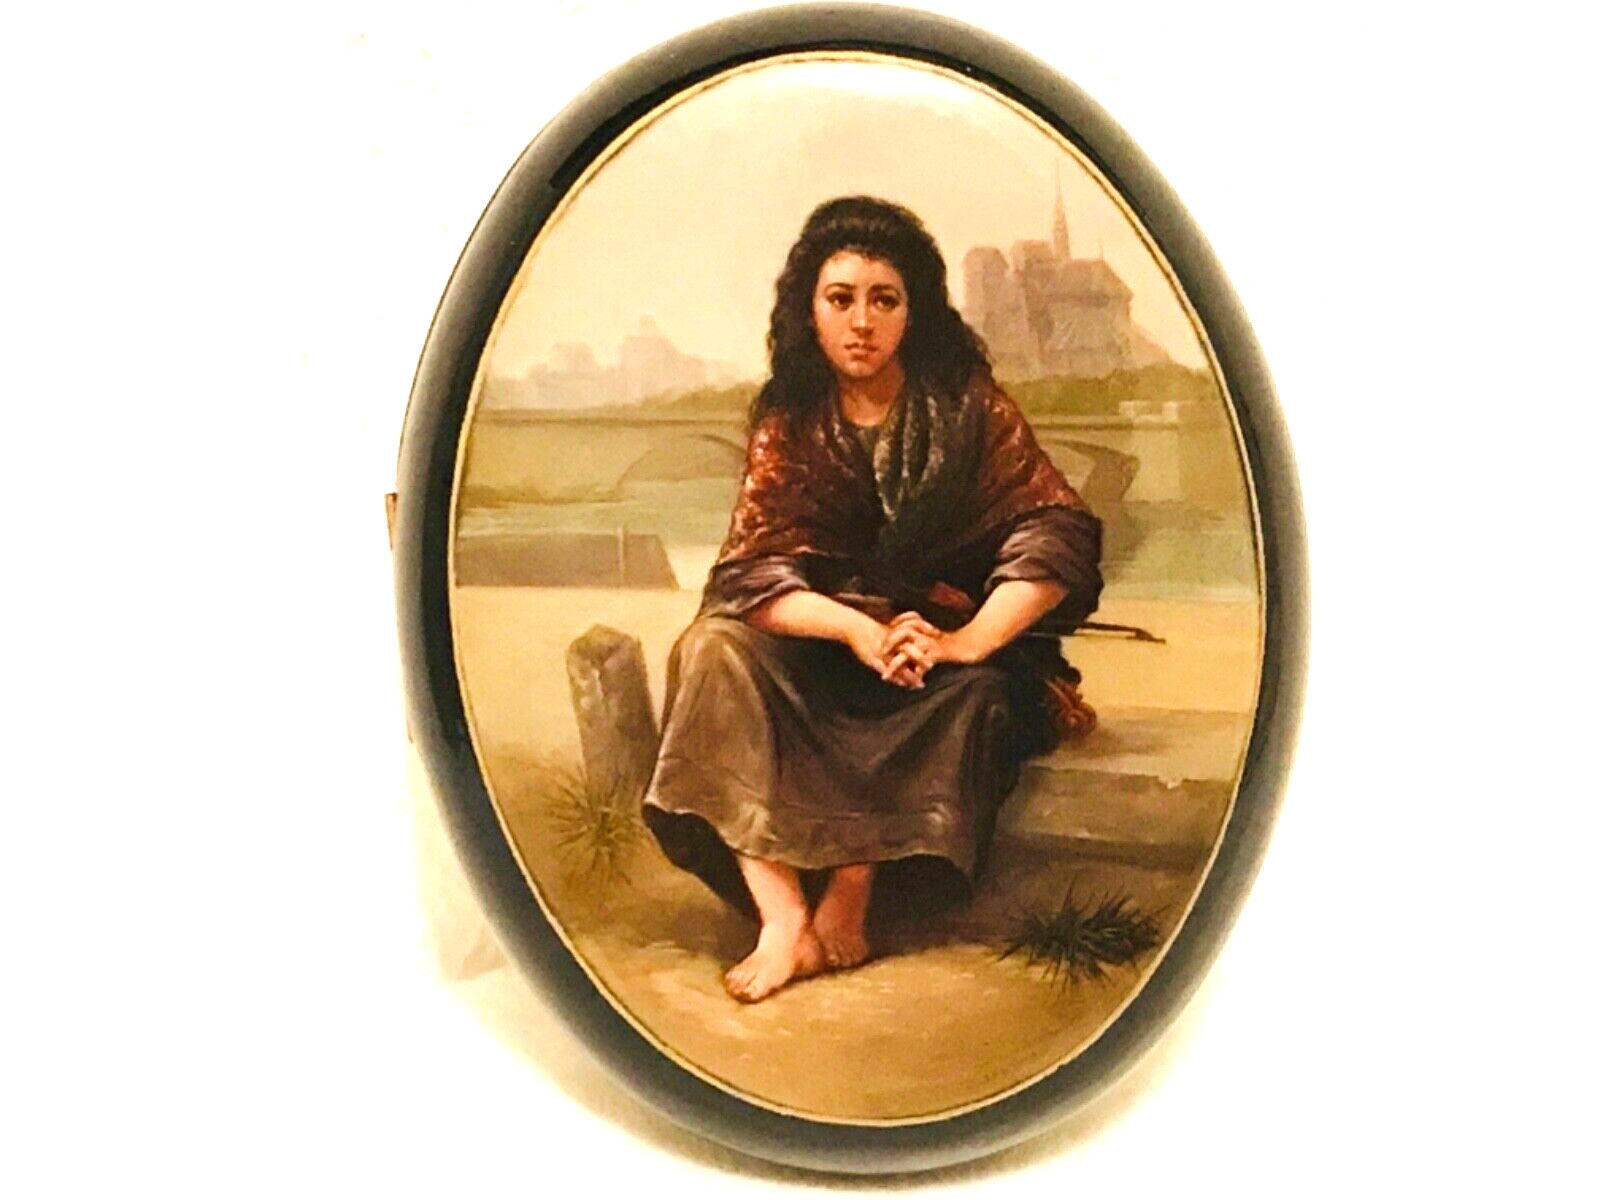 🔥EXQUISITE 1890 Bohemian William-Adolphe Bouguereau hand painted lacquer box🔥